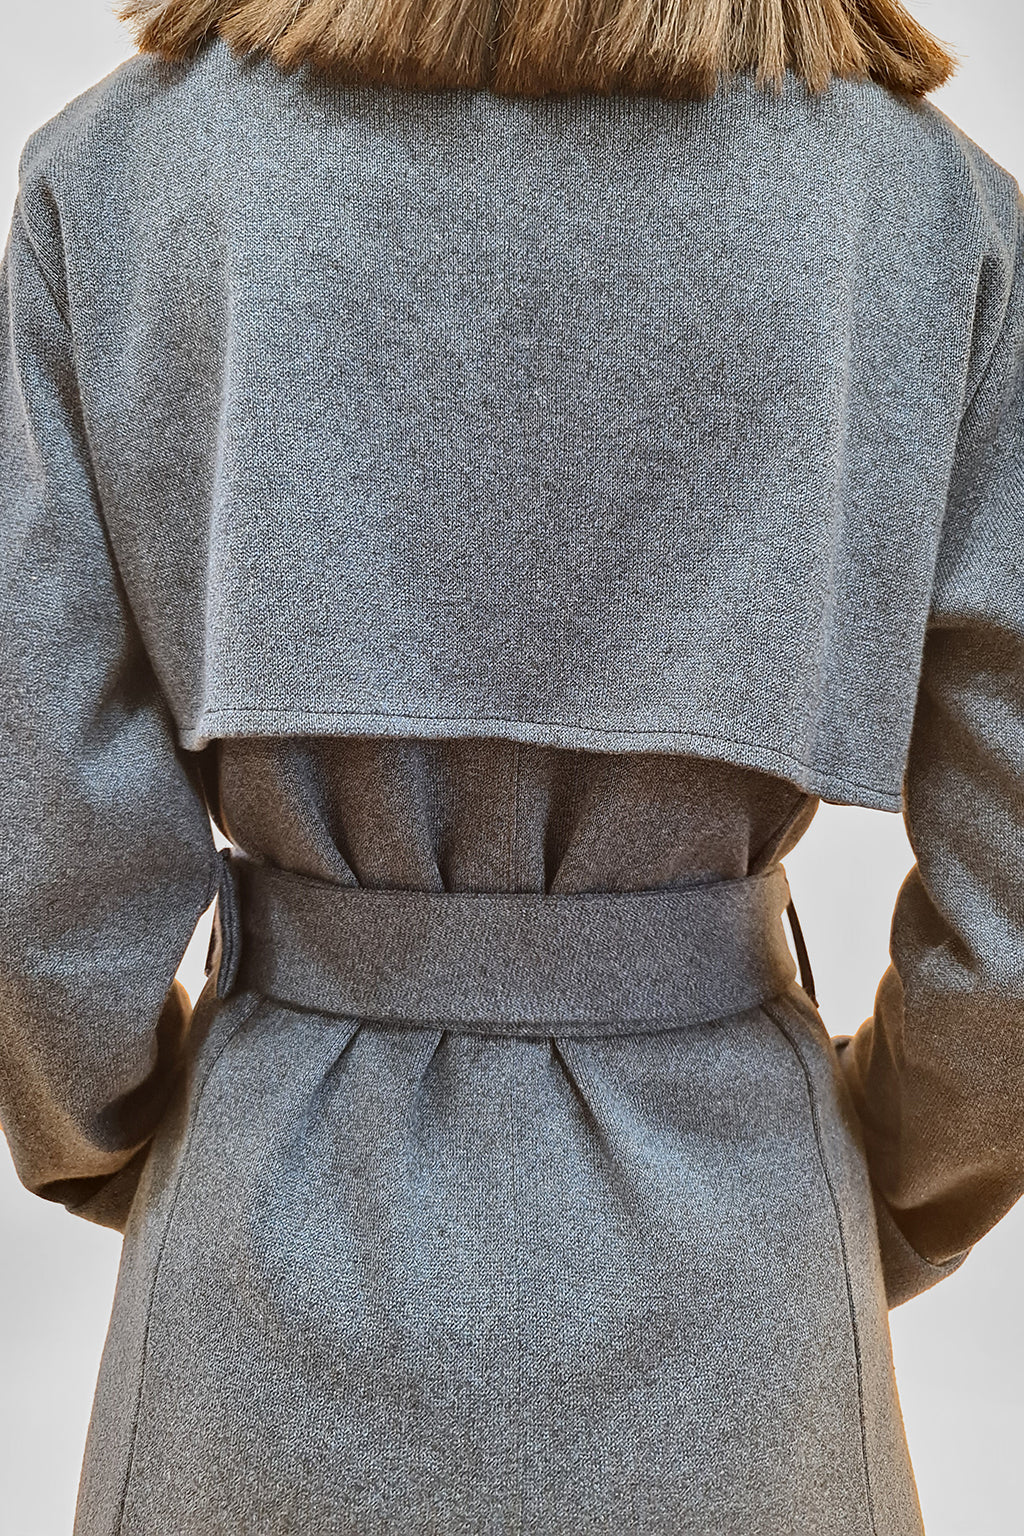 Back view of a person wearing a stylish gray wool coat with a belt and a wide collar